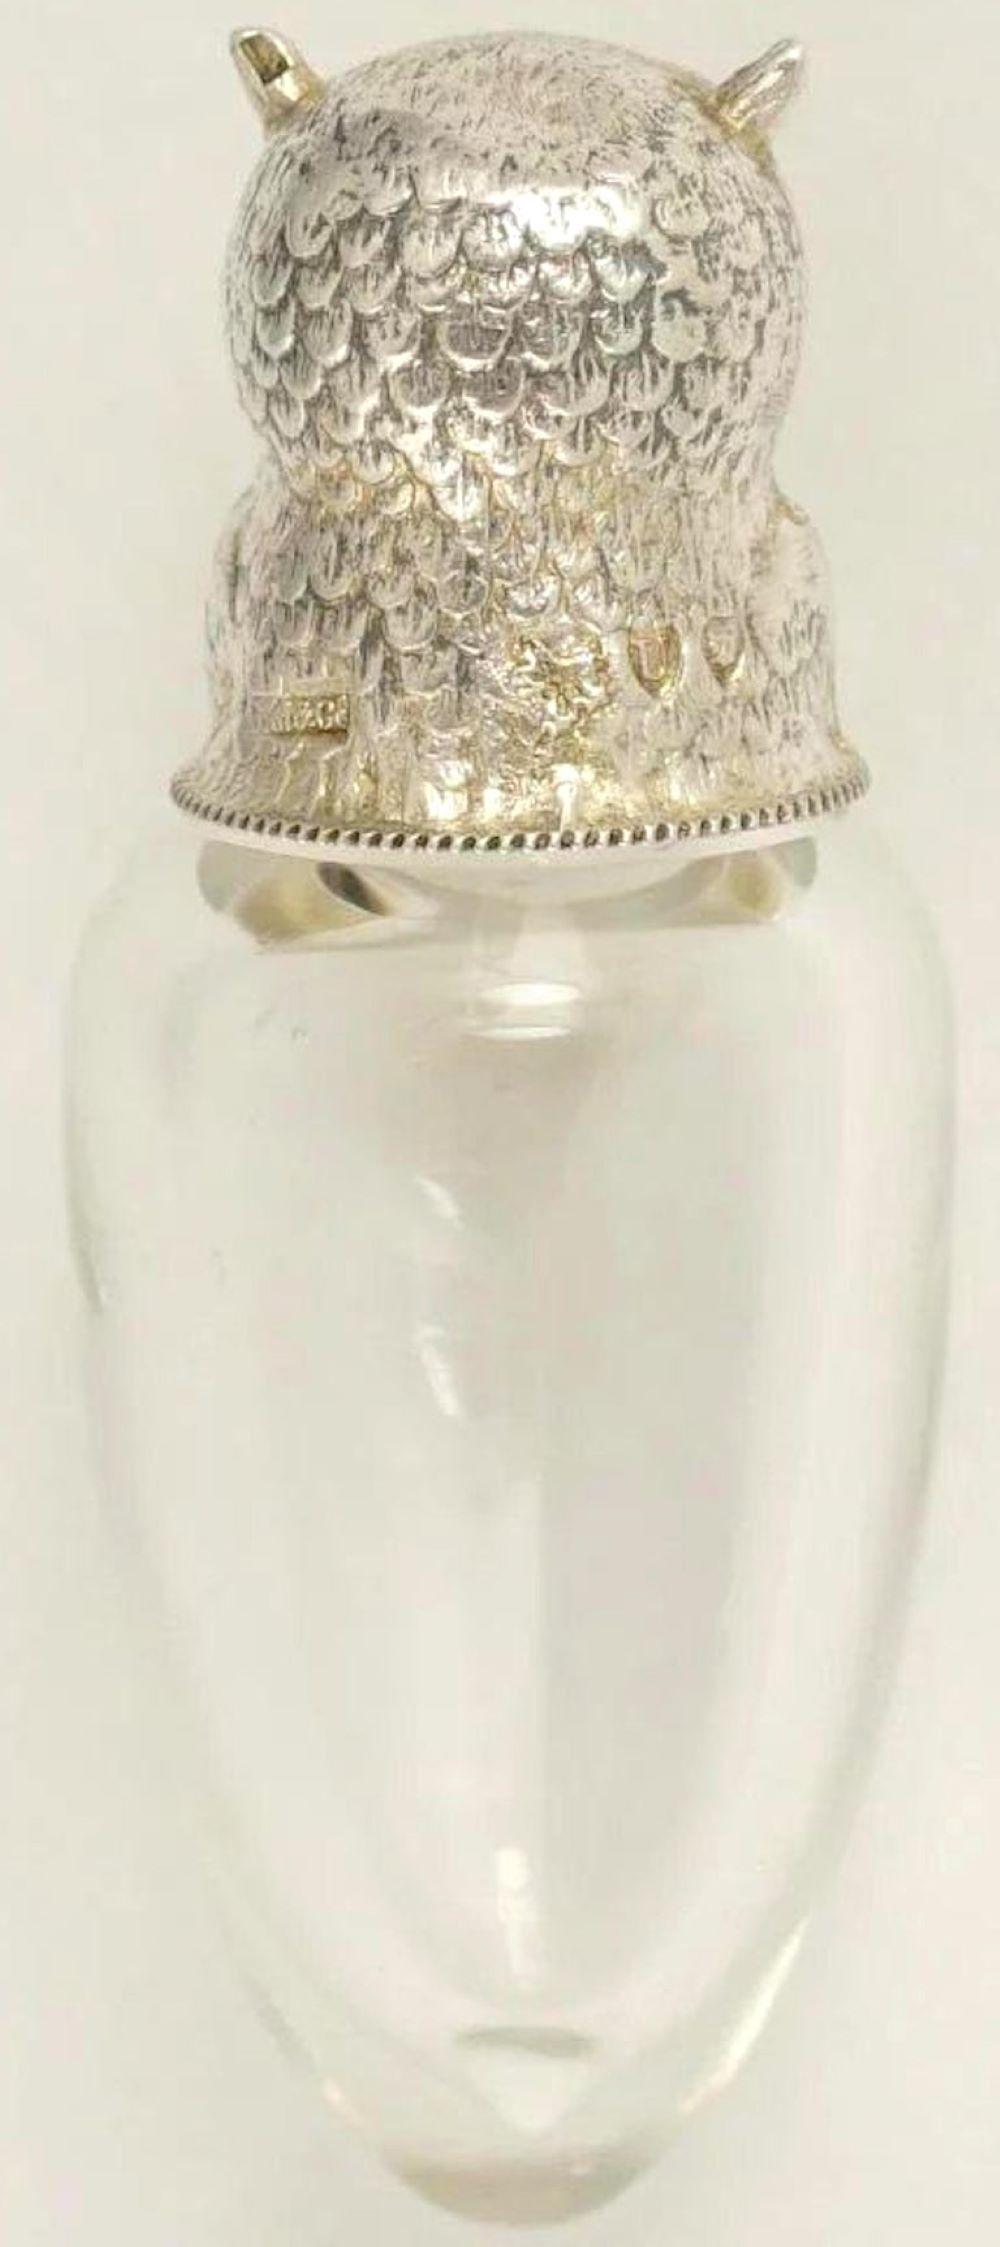 19th-century English figural sterling silver and crystal owl perfume bottle by Sampson Mordan for the French market.
An exceptional example is the owl's head, realistically cast and modeled, with a large inset of reverse painted yellow and black